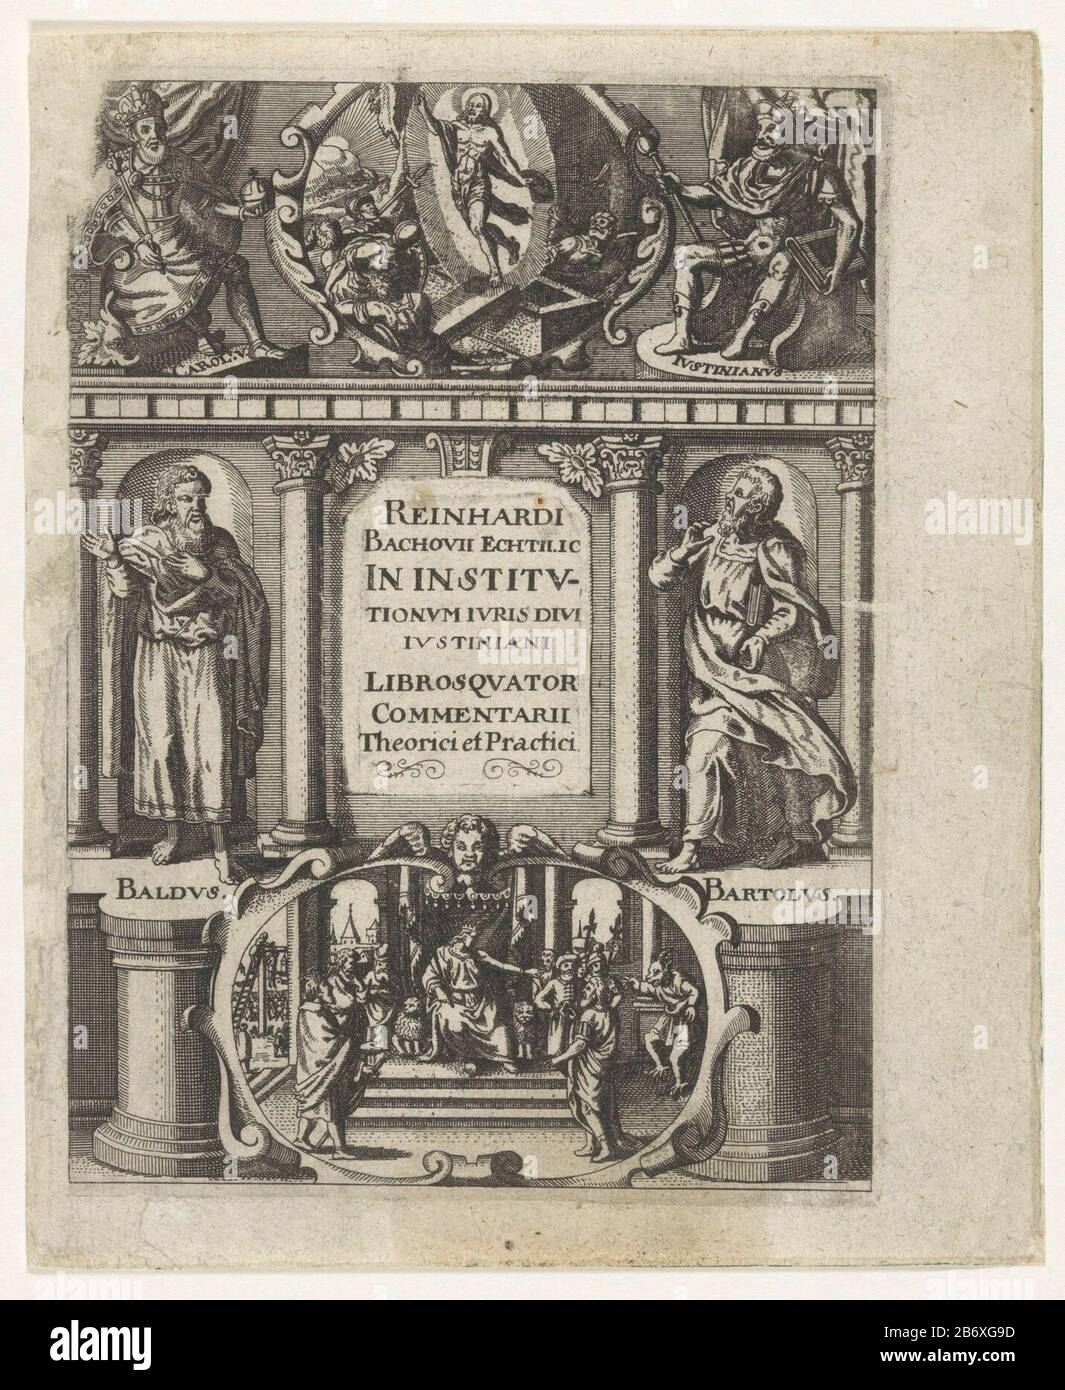 Juristen Baldus en Bartolus en keizers Karel V en Justinianus Titelpagina voor Reiner Bachoff von Echt, In institutionum iuris divi Iustiniani Libros Quator, 1643 Juristen Baldus the Ubaldis and Bartolus the Saxoferrato standing in niches flanking a tablet with title. At the top, seating the enthroned Emperor Charles V and Justinian on both sides of a cartridge with the resurrection of Christ from the grave. On the underside a cartouche with figures around a ruler on a troon. Manufacturer : print maker: anonymous publisher: Johann Godfrey Schönwetter (possible) Place manufacture: Frankfurt Dat Stock Photo